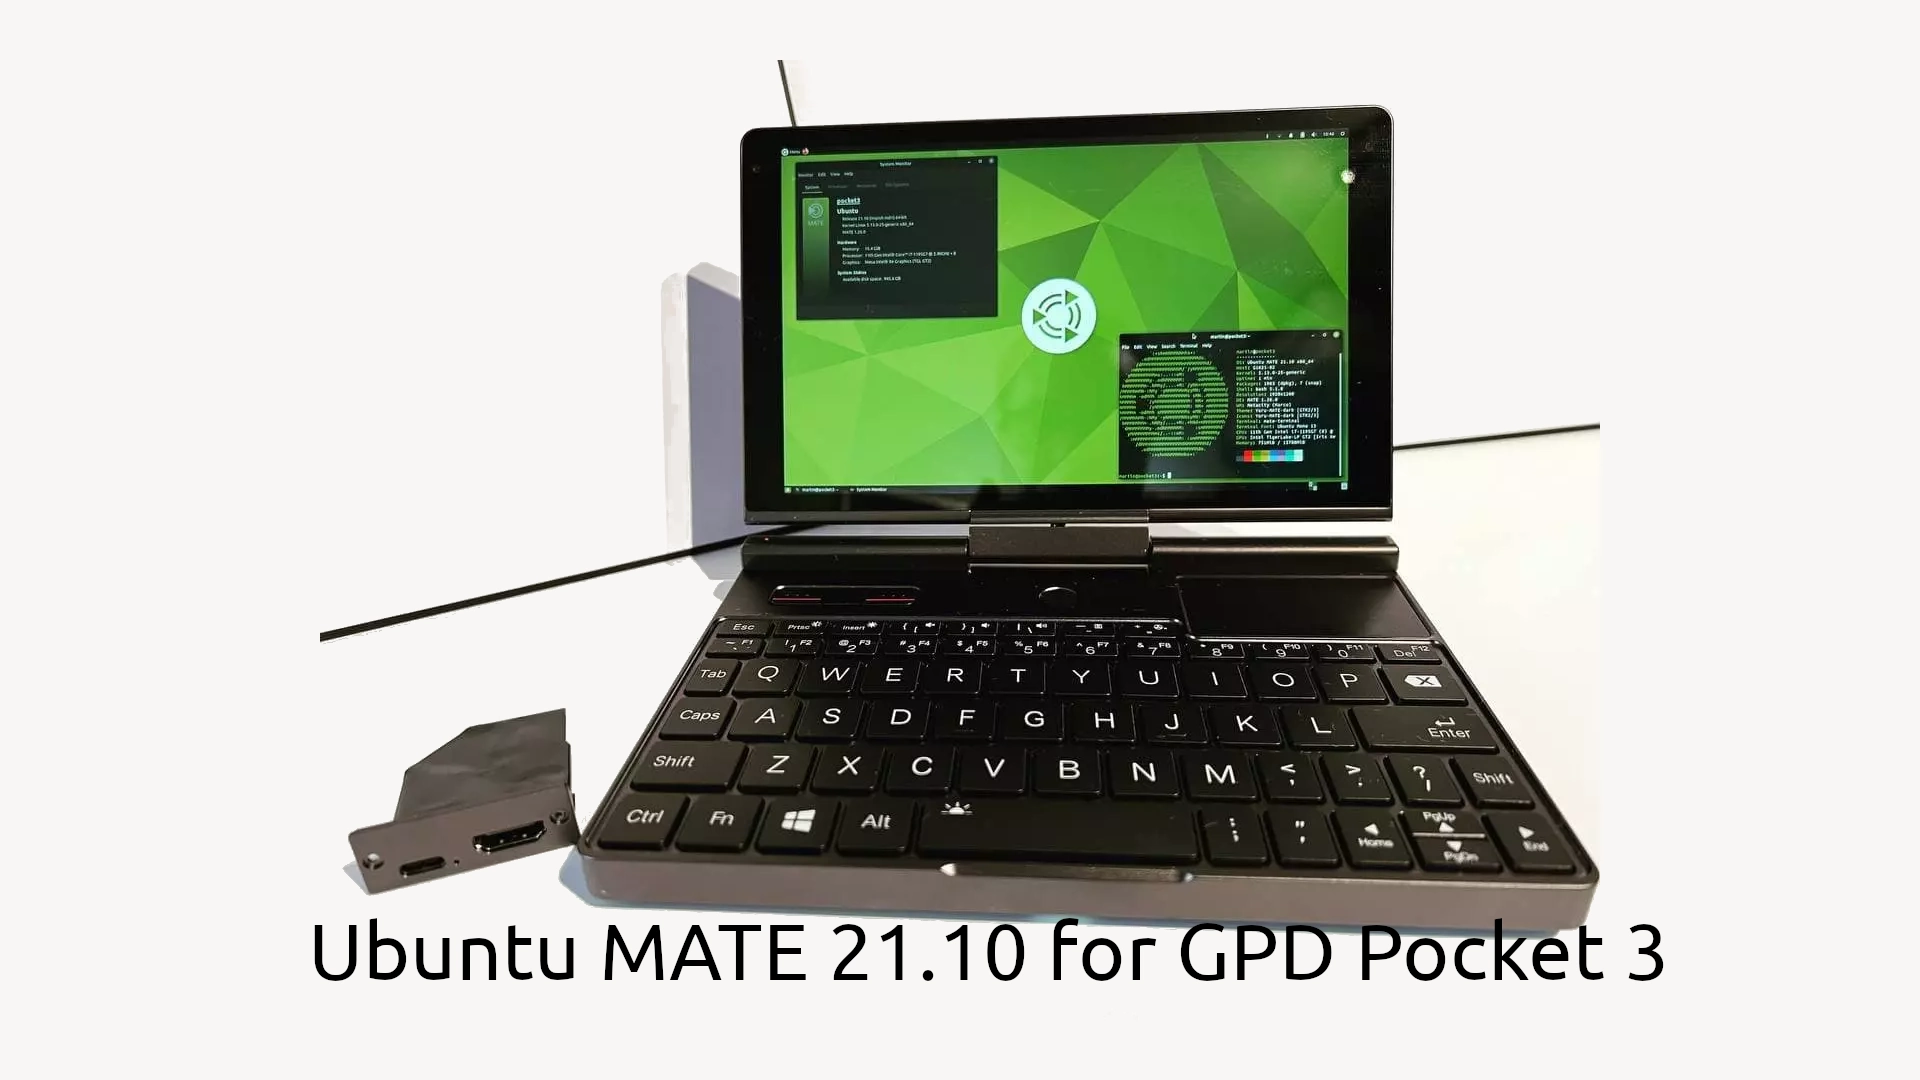 Ubuntu MATE 21.10 Released for the GPD Pocket 3 Tiny Computer